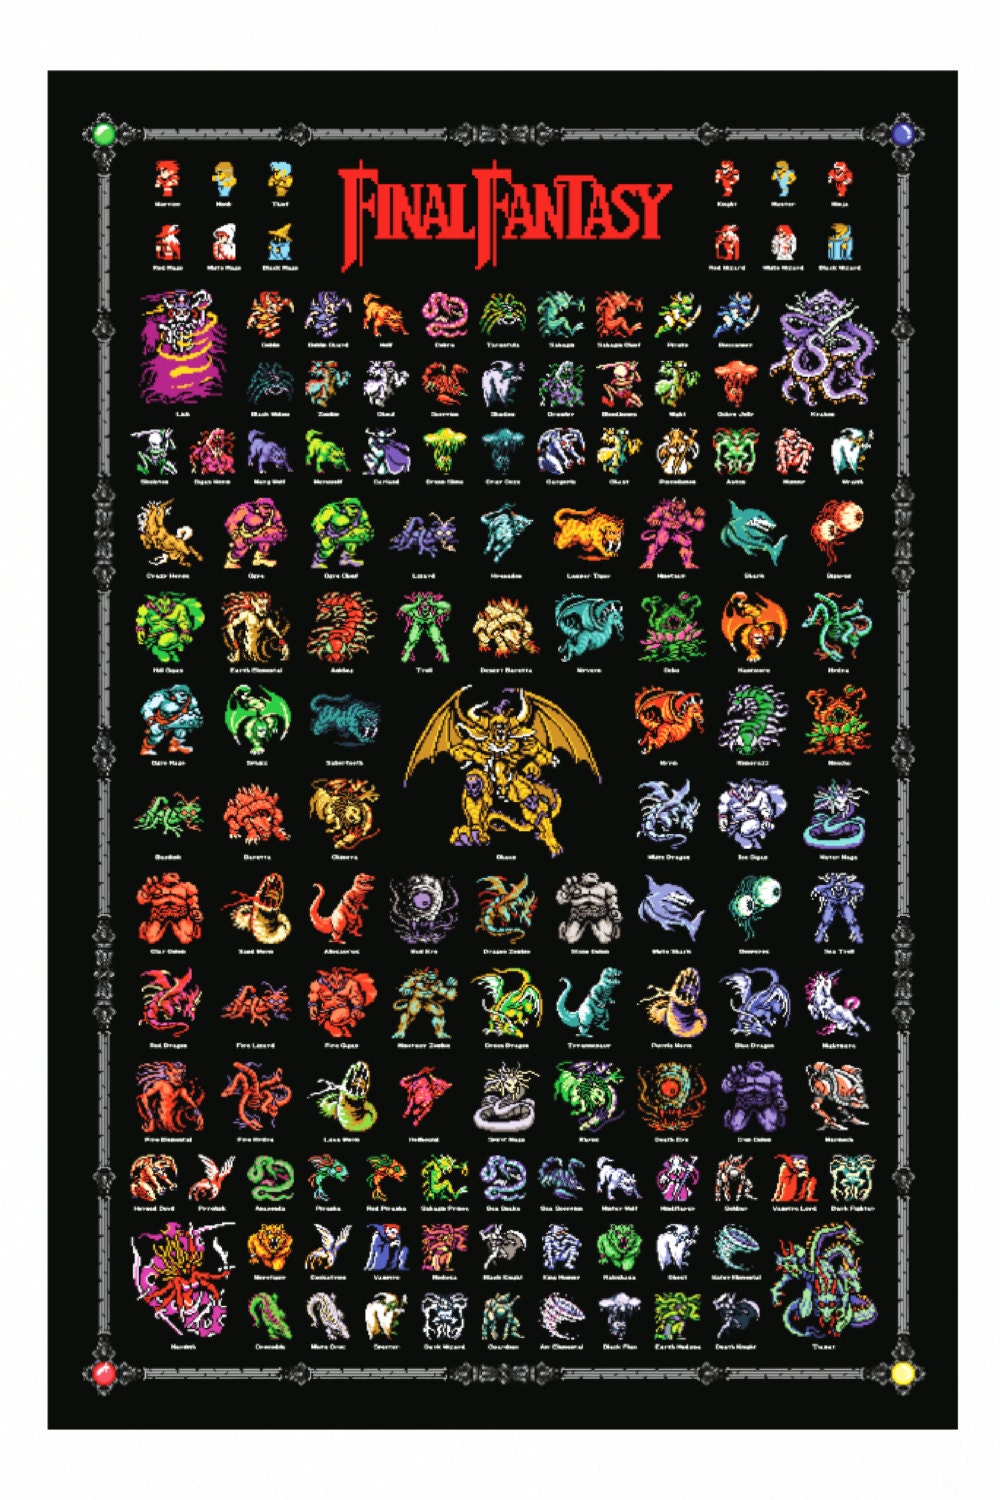 final-fantasy-1-retro-nes-style-poster-4-fiends-chaos-monsters